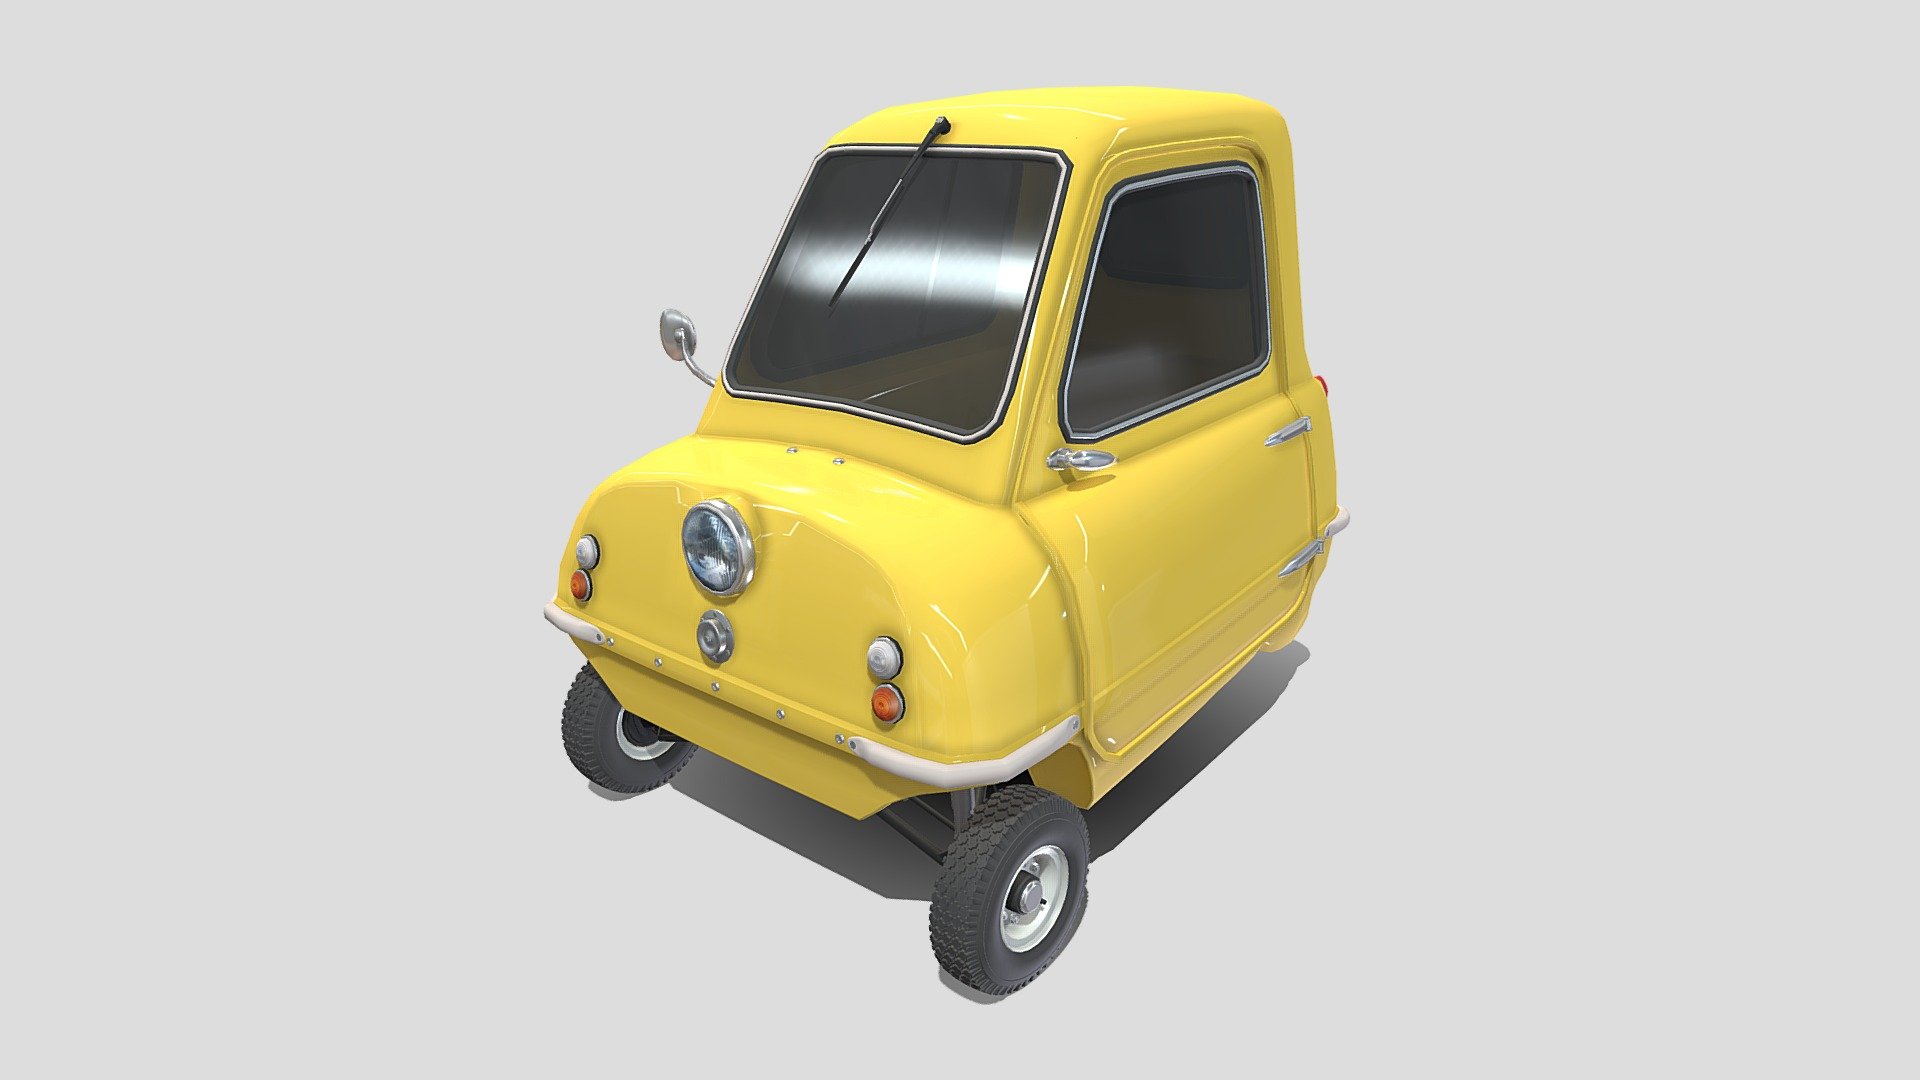 Highly detailed Peel P50 Micro Car with a detailed drivetrain (suspension, chassis, motor, steering, brakes) 3d model rendered with Cycles in Blender, as per seen on attached images. 
The 3d model is scaled to original size in Blender.

File formats:
-.blend, rendered with cycles, as seen in the images;
-.blend, with a seethrough of the chassis and drivetrain, rendered with cycles, as seen in the images;
-.obj, with materials applied;
-.dae, with materials applied;
-.fbx, with materials applied;
-.stl;

Files come named appropriately and split by file format.

3D Software:
The 3D model was originally created in Blender 2.8 and rendered with Cycles.

Materials and textures:
The models have materials applied in all formats, and are ready to import and render.
The models come with one png texture.

Preview scenes:
The preview images are rendered in Blender using its built-in render engine &lsquo;Cycles' 3d model